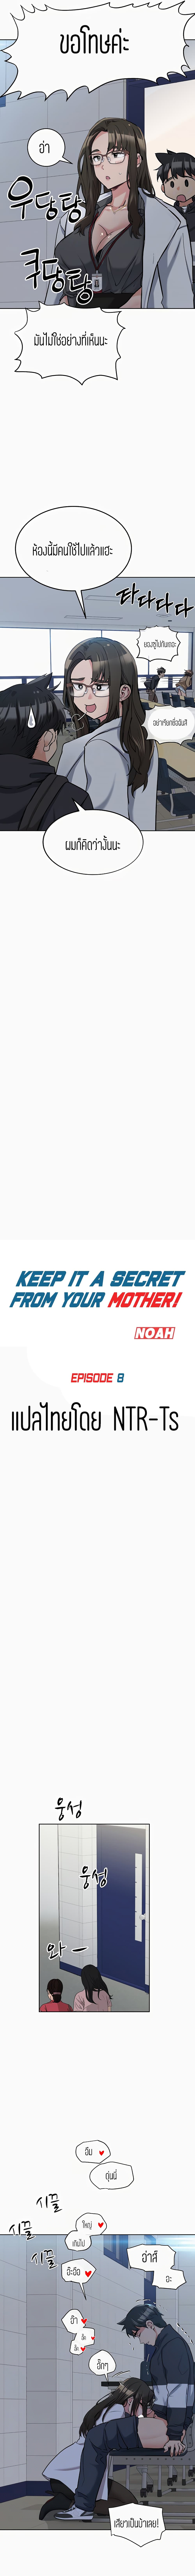 Keep it a secret from your mother! 8 ภาพที่ 3